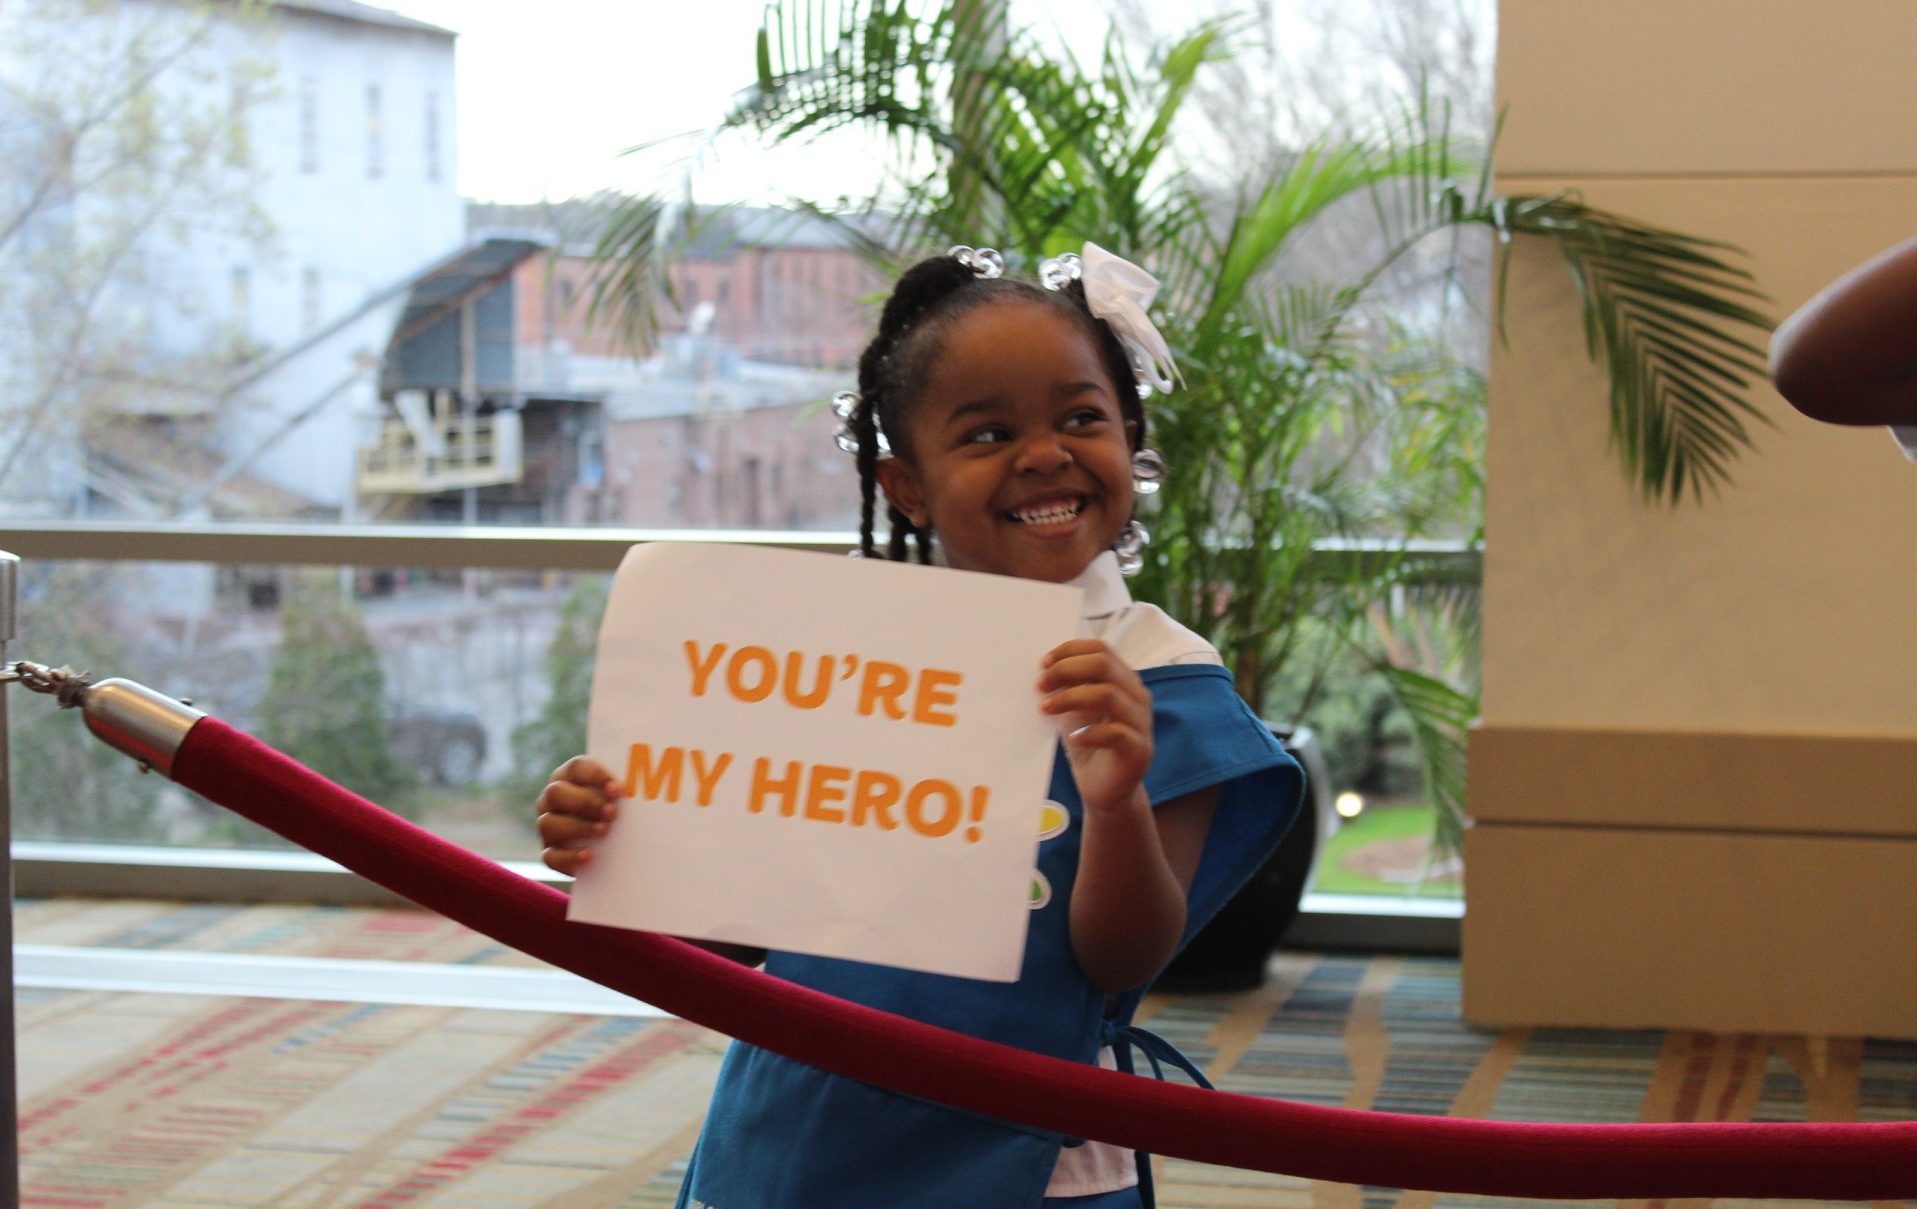  A Girl Scout Daisy holds up a sign that reads "You're my hero!" in orange text 